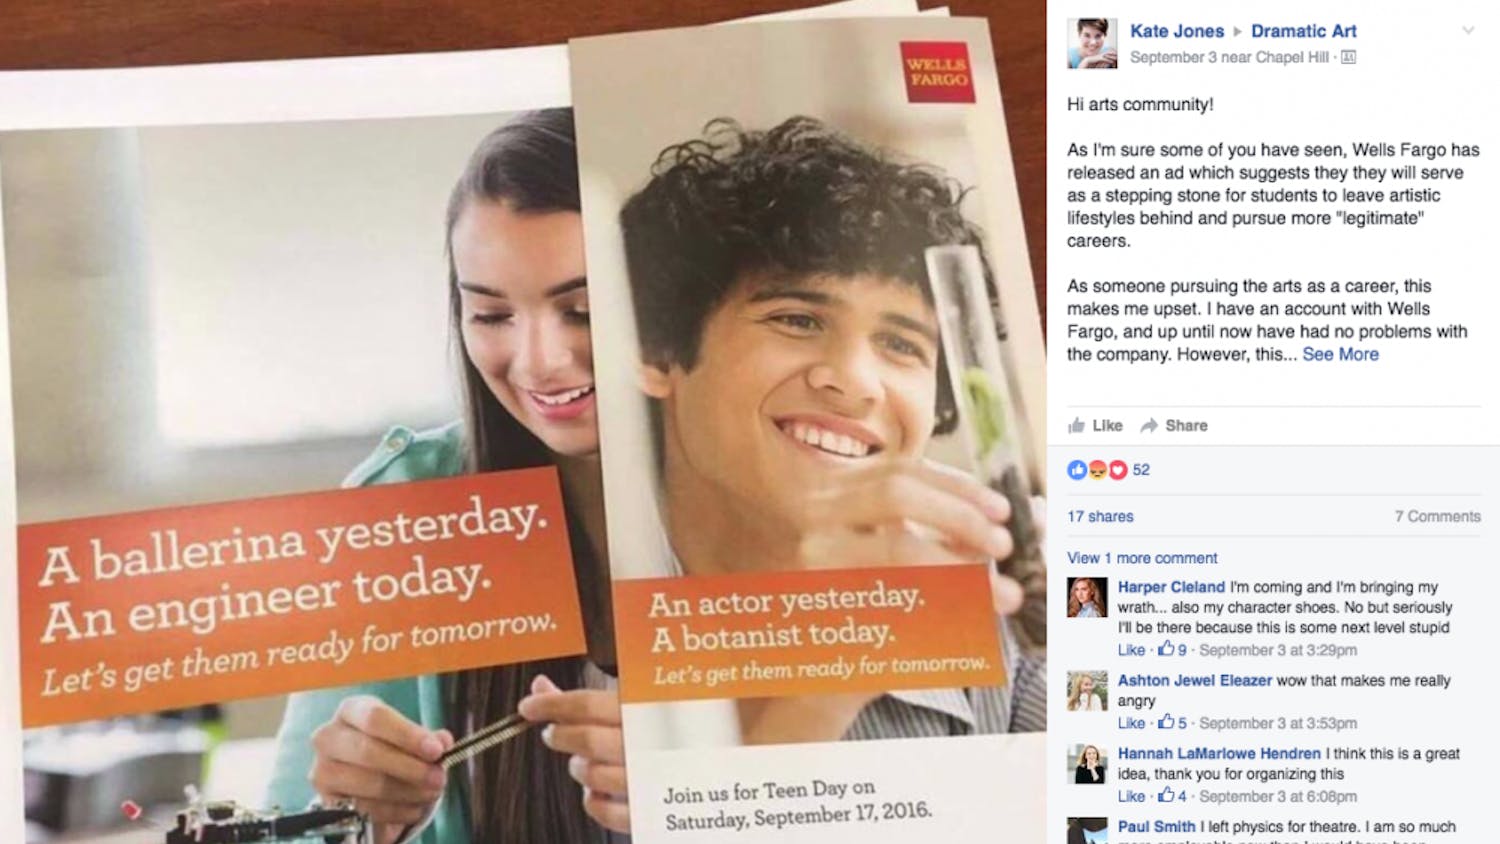 The ads that Wells Fargo ran. They have since&nbsp;apologized for the ad campaign.&nbsp;